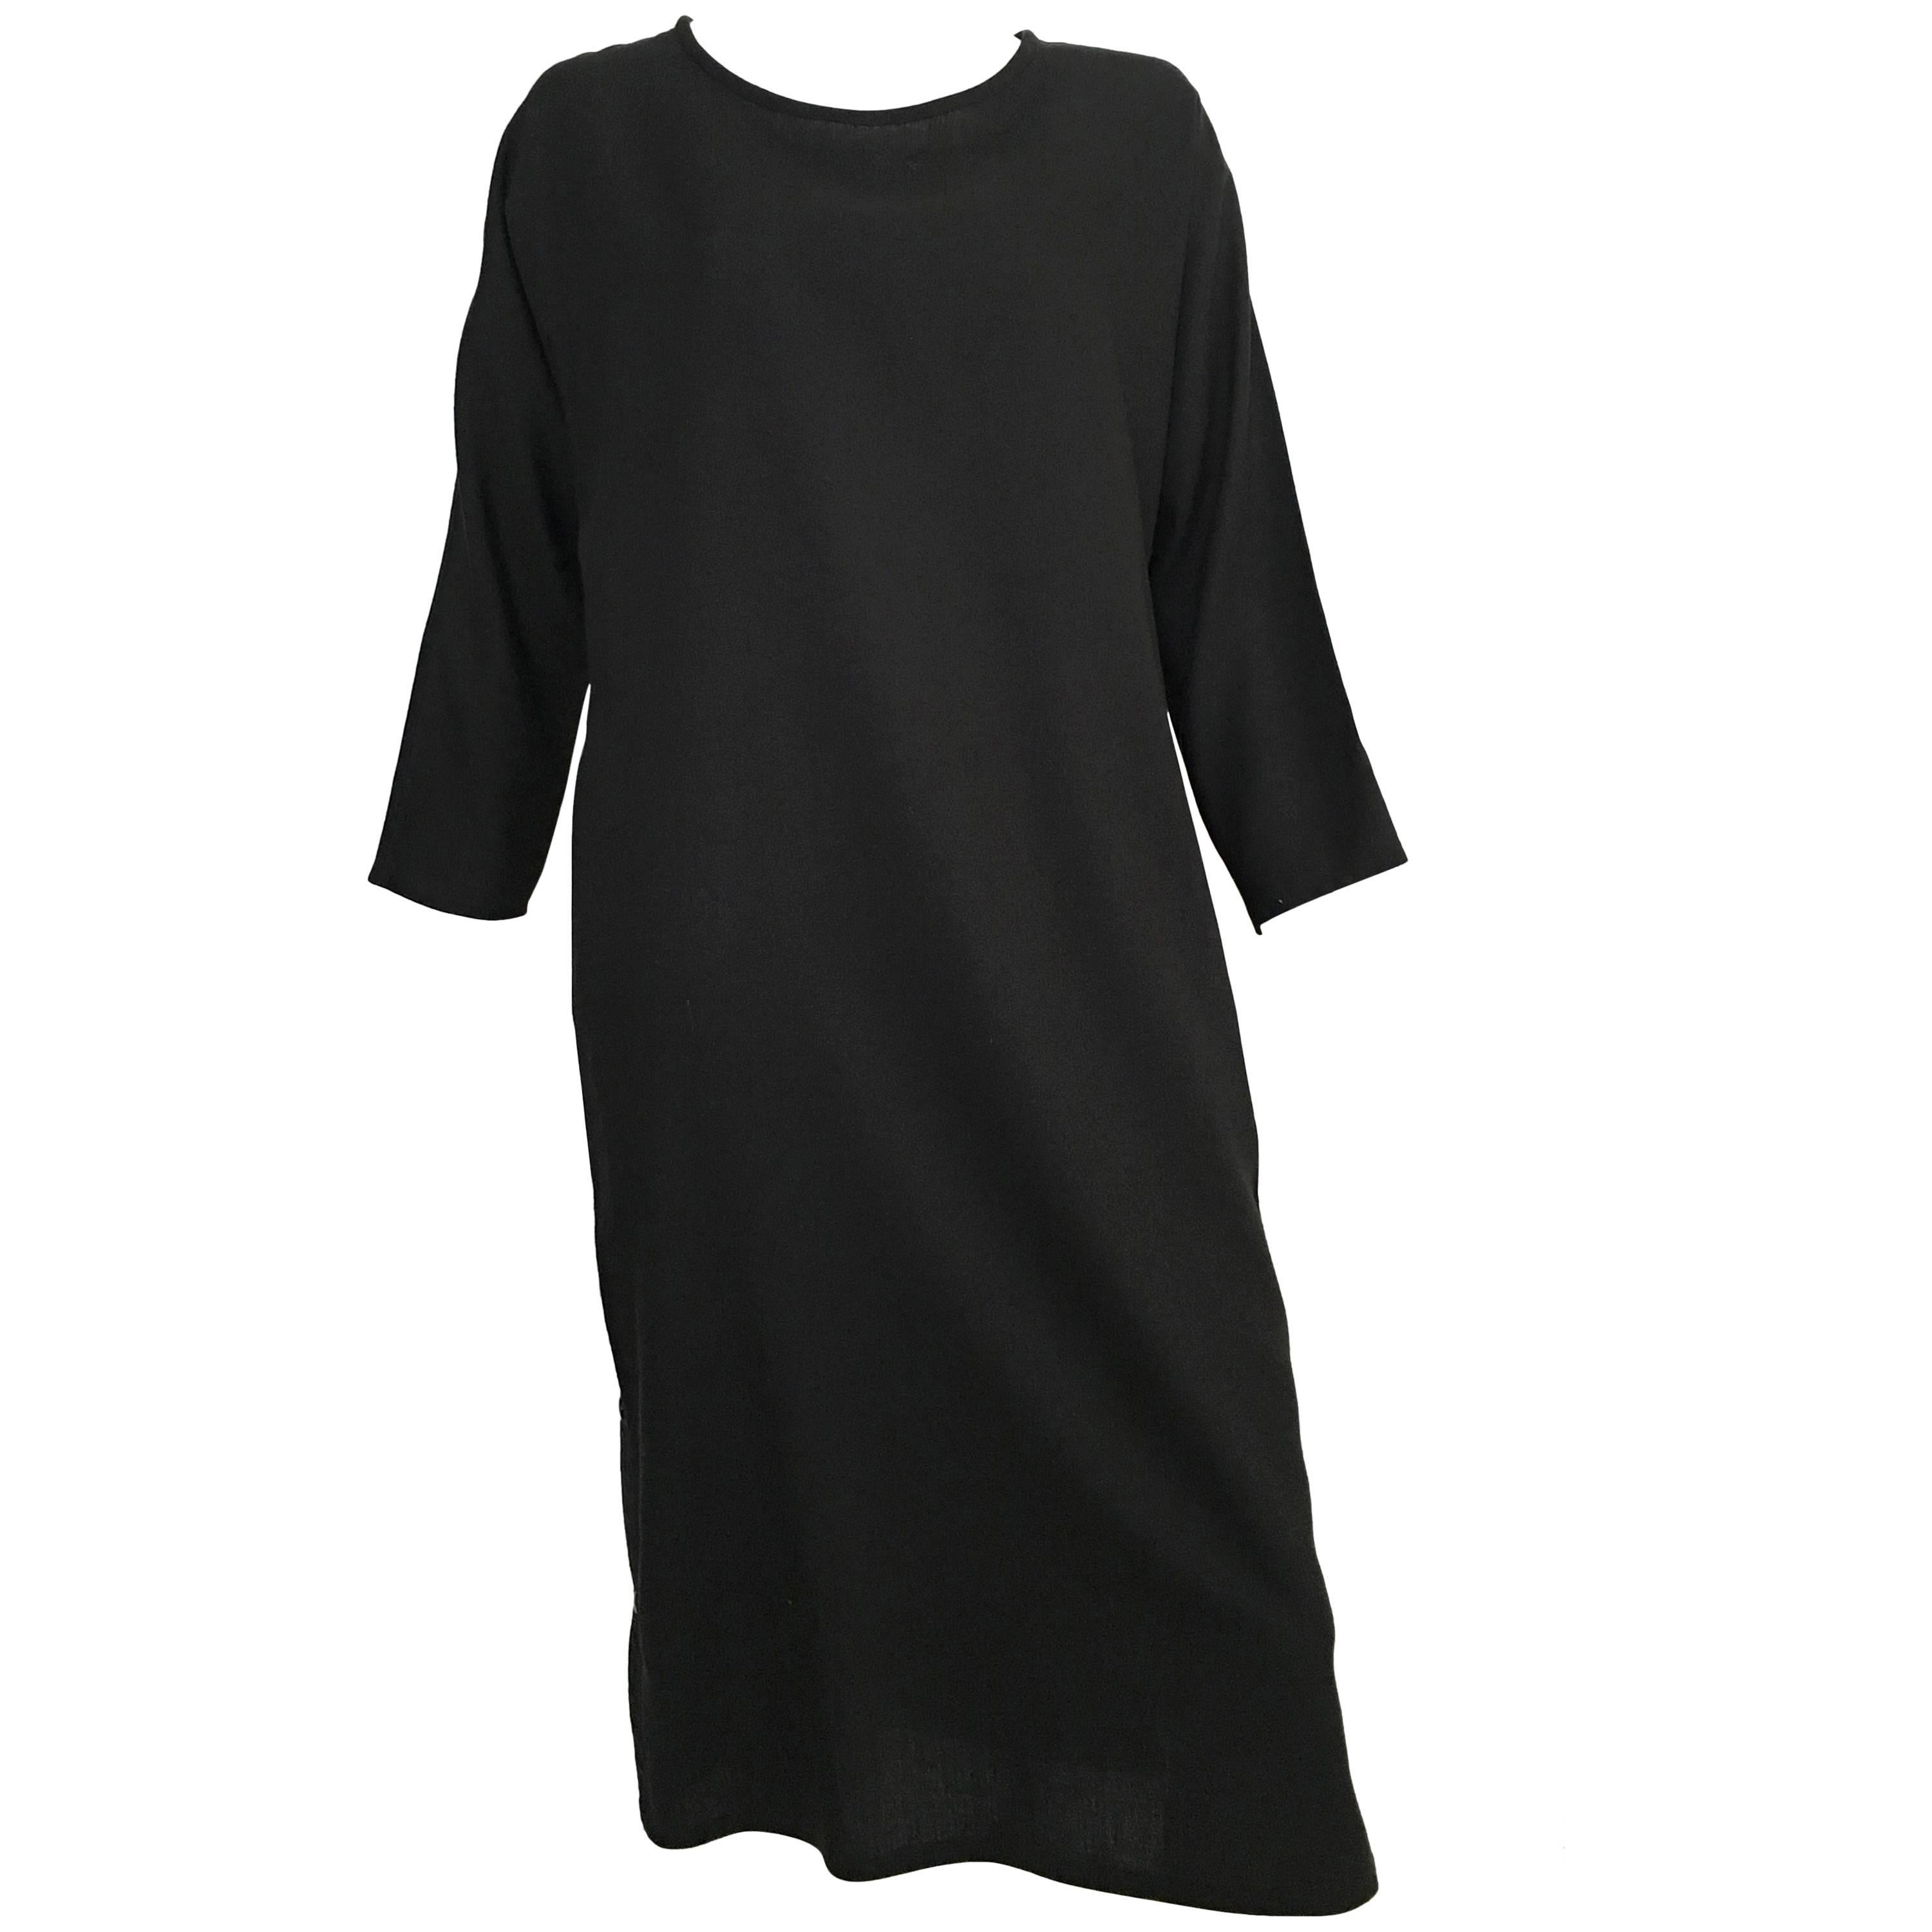 Geoffrey Beene Black Linen Dress With Pockets Size 12. For Sale